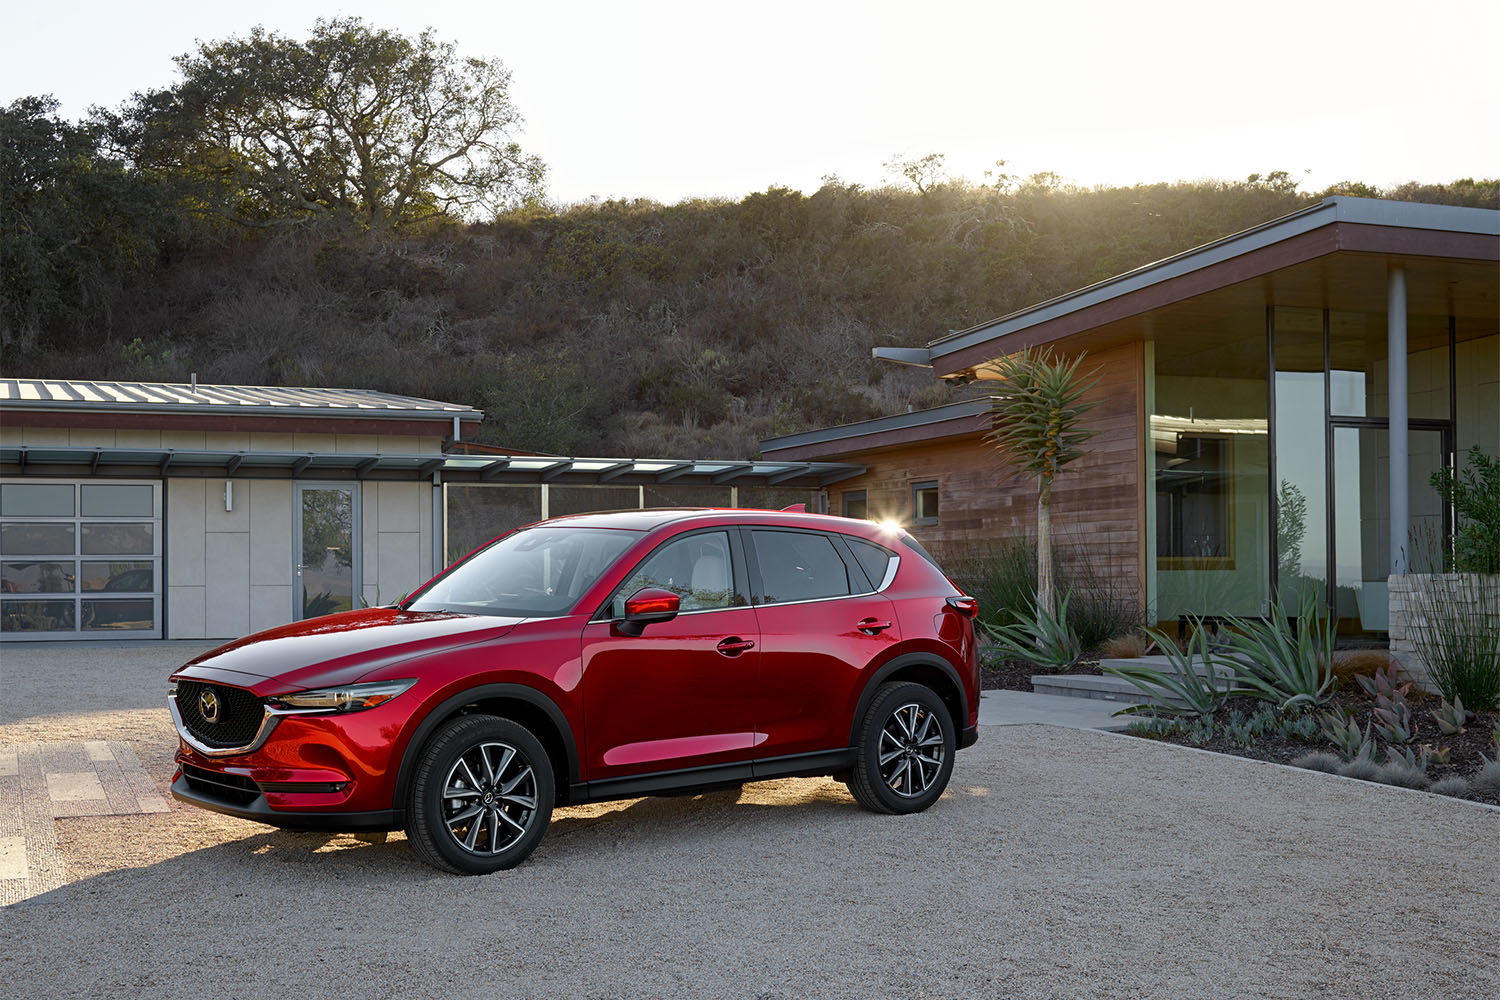 2018 Mazda CX-5: One of Capital One's 10 Best Road Trip Vehicles, According to Science